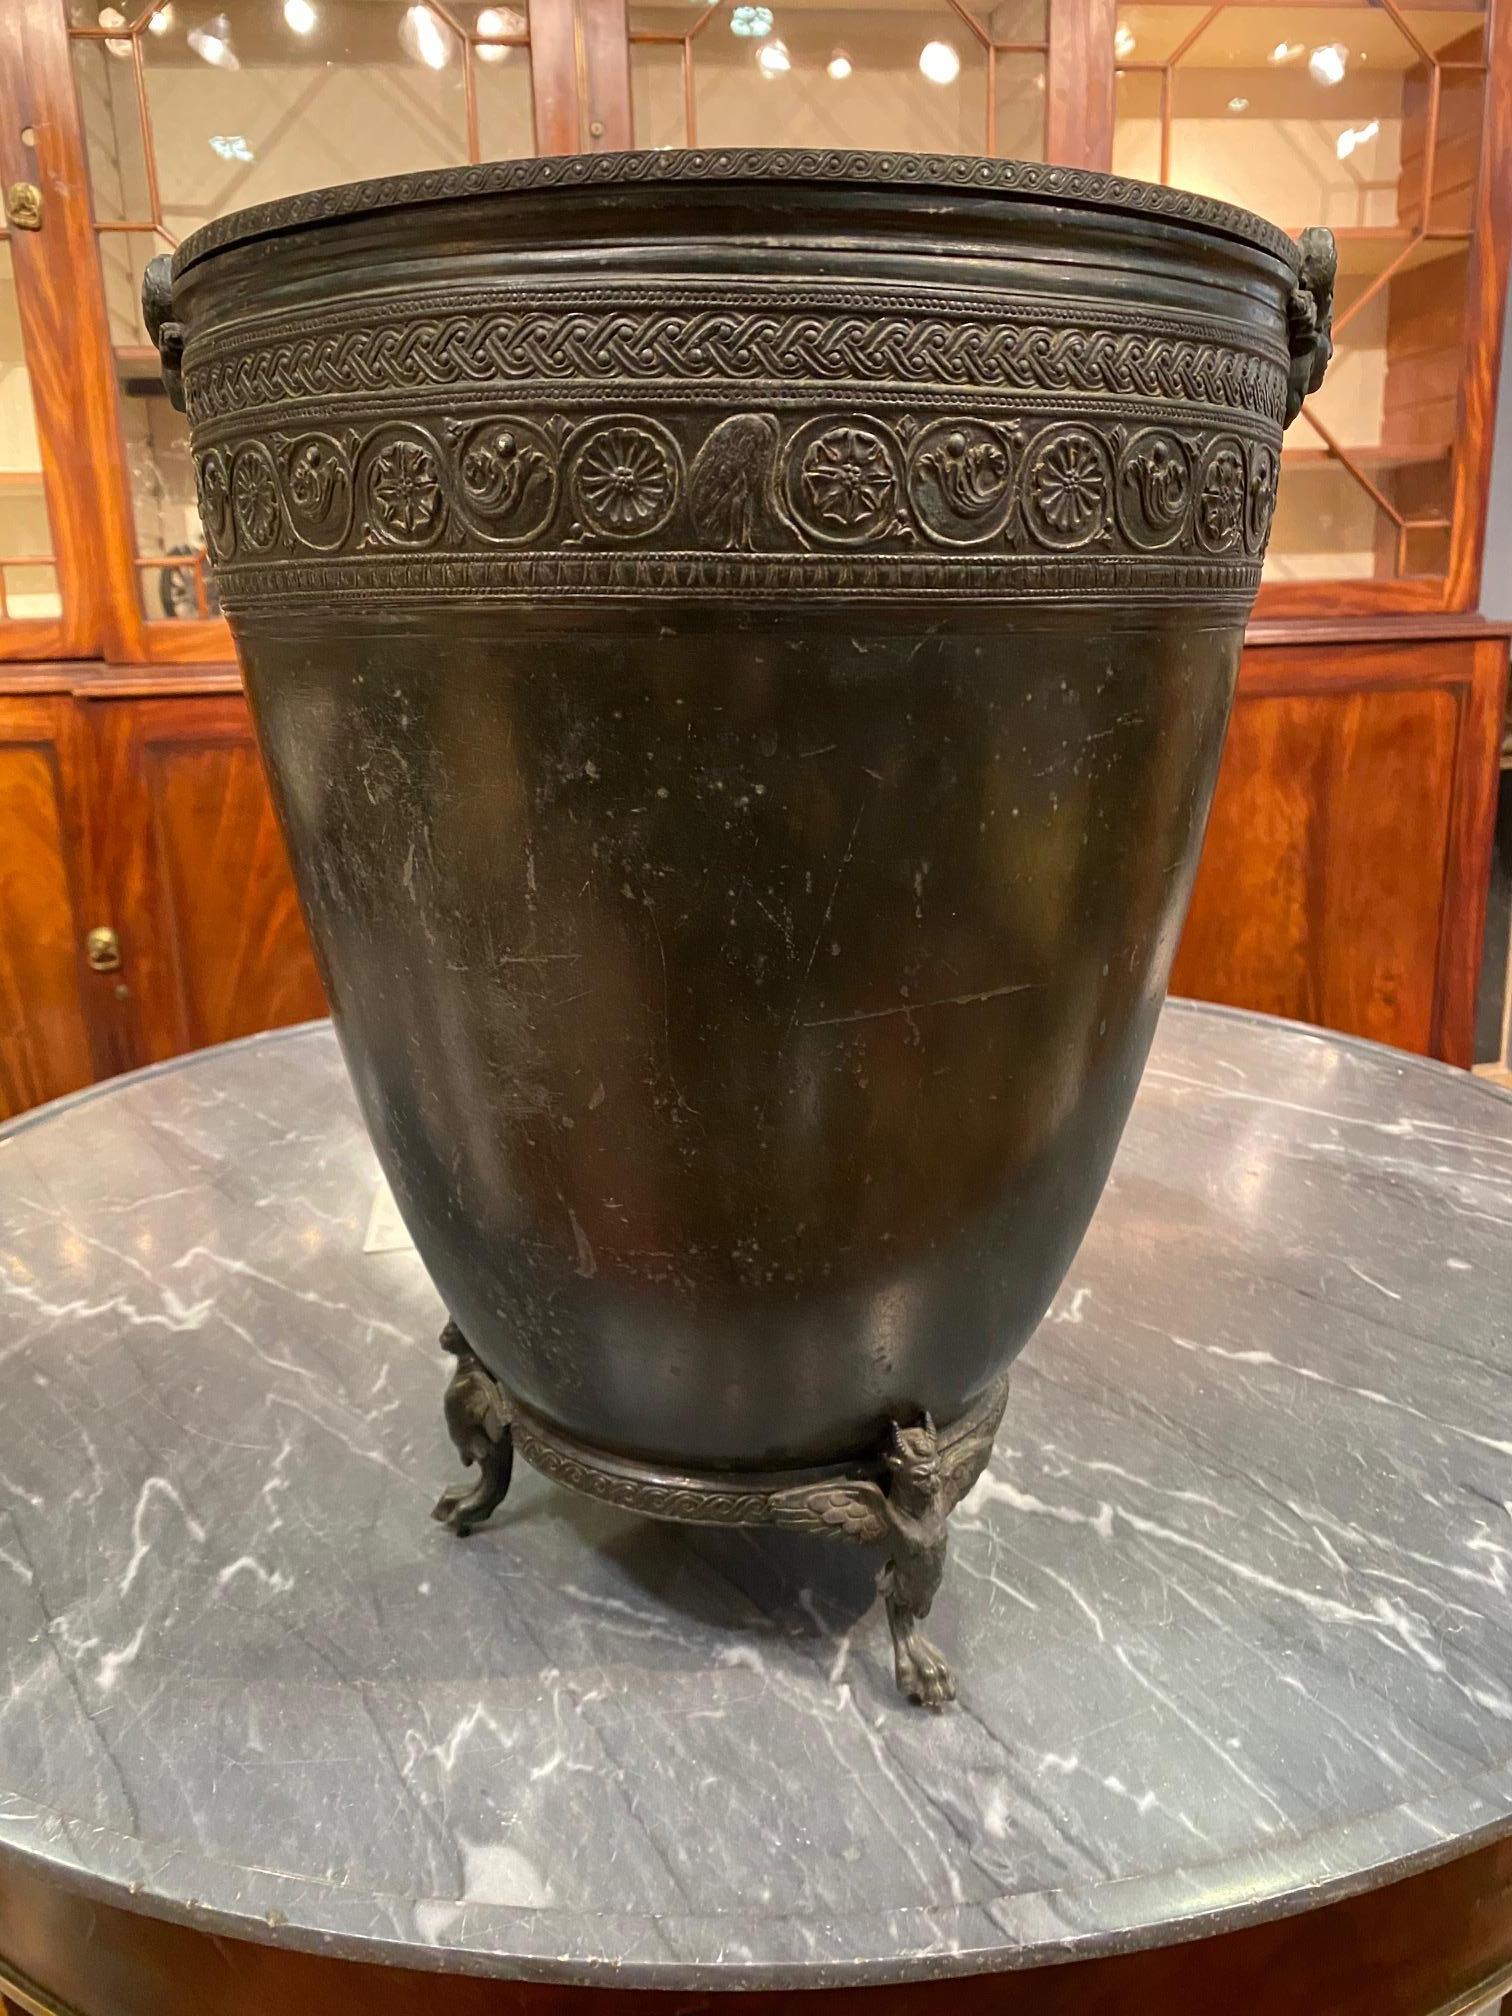 Neoclassical Grand Tour bronze vase by J. Chiurazzi & Fils higlhy decorated with scroll, scene in relief and paw feet with cartouche handles.